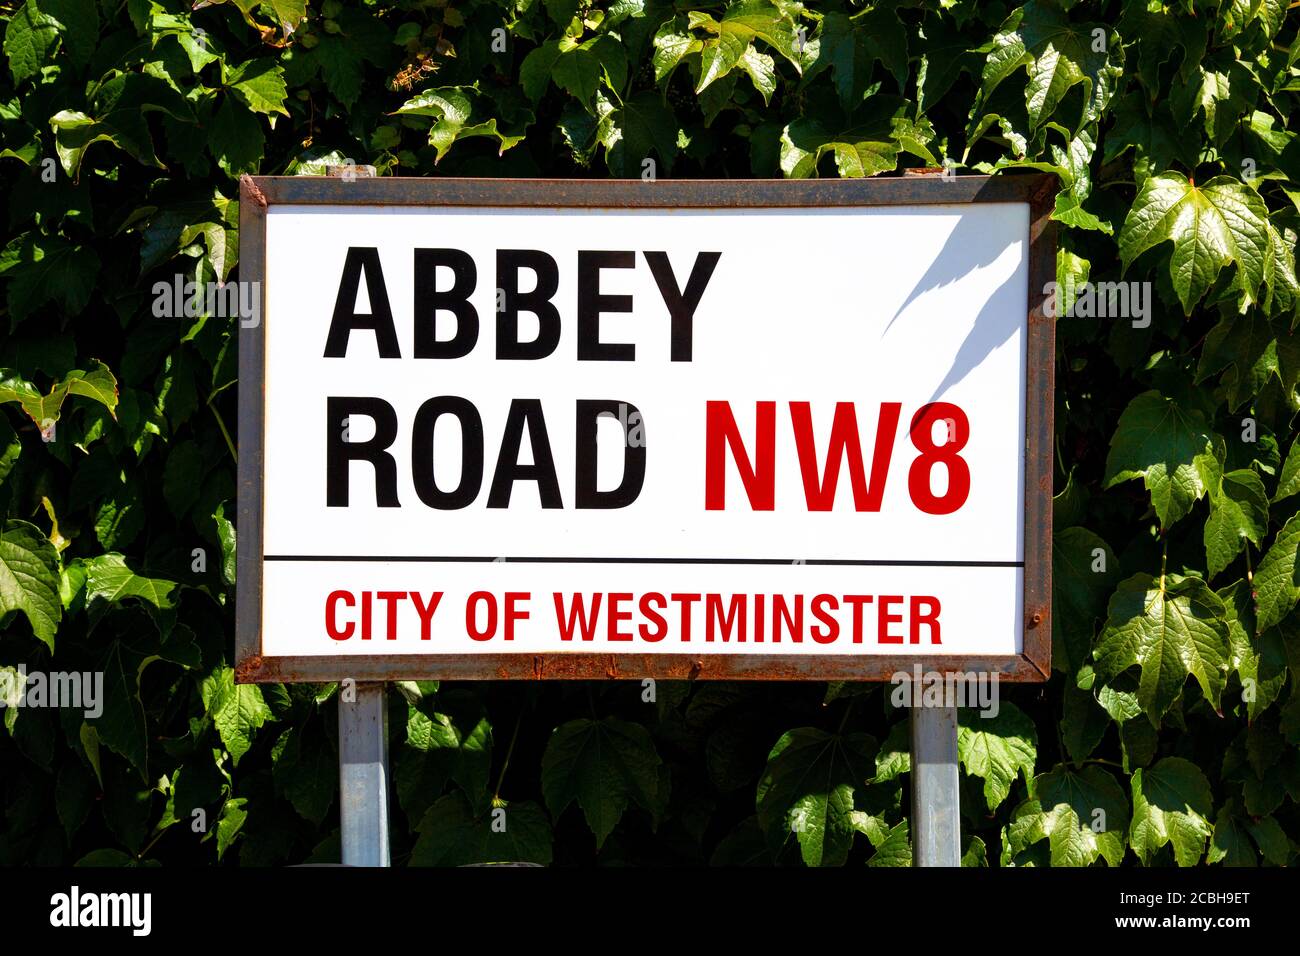 Sign for Abbey Road NW8, London, UK Stock Photo